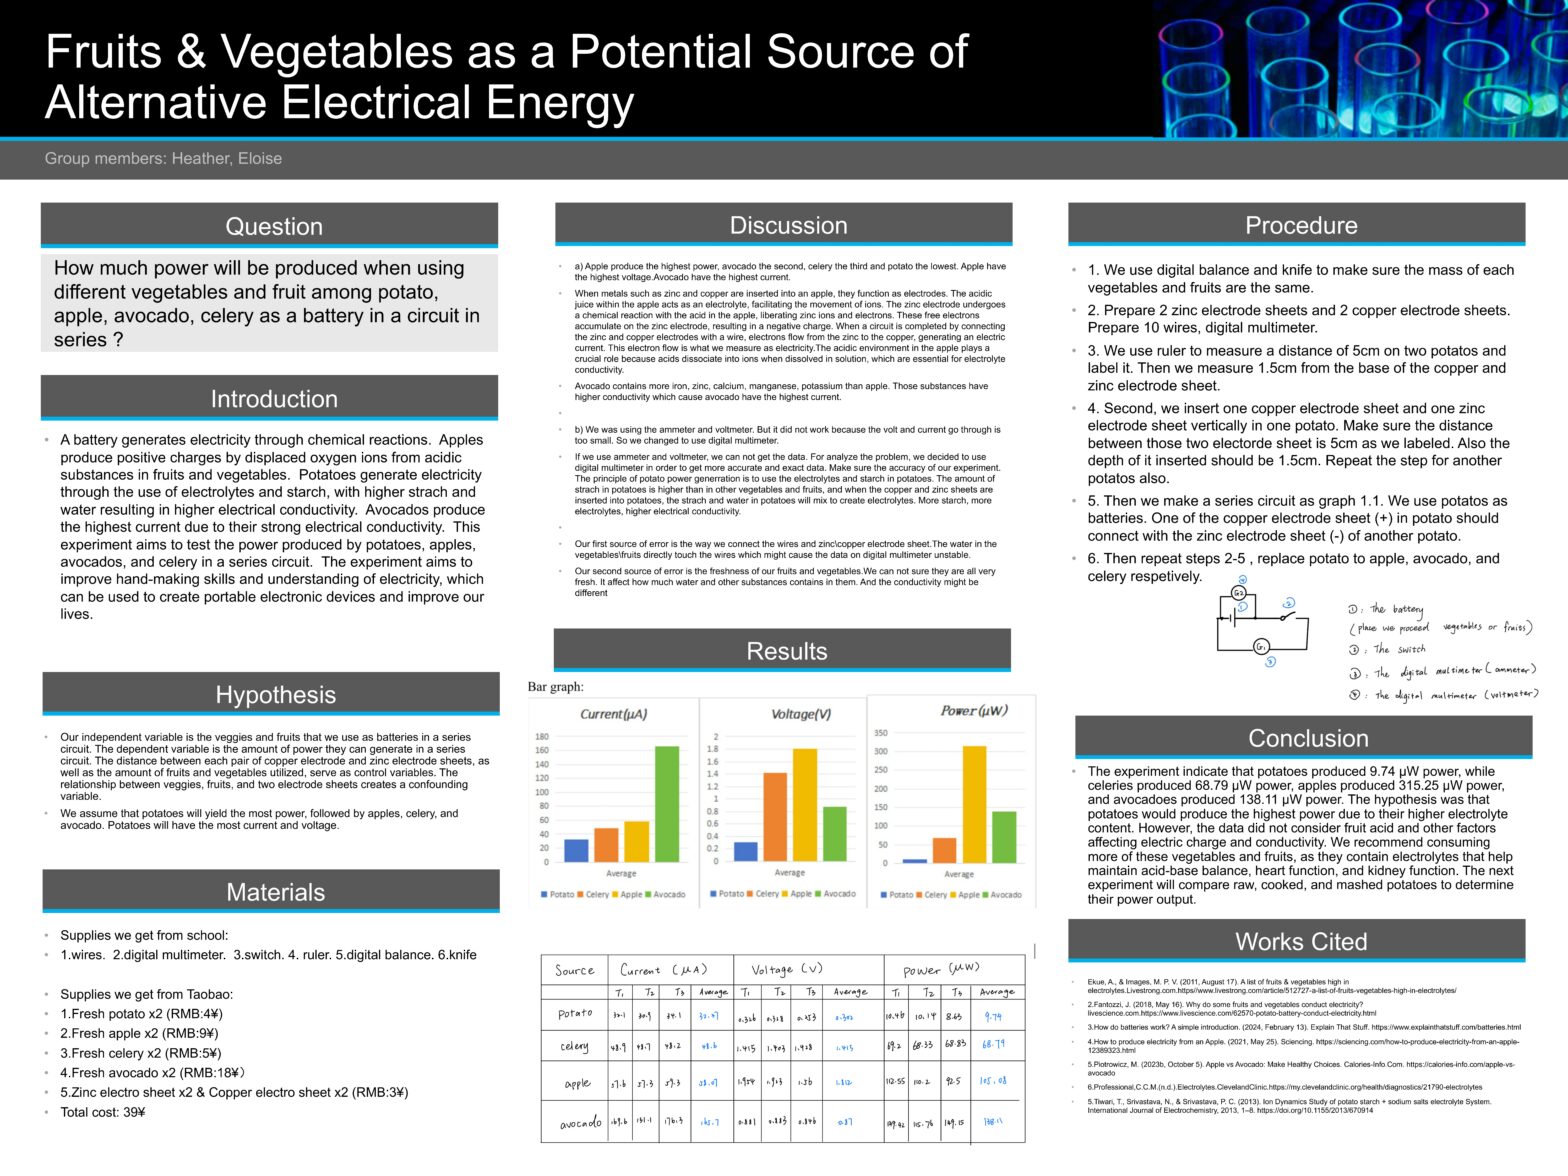 Fruits and vegetables as a potential source of alternative electrical energy